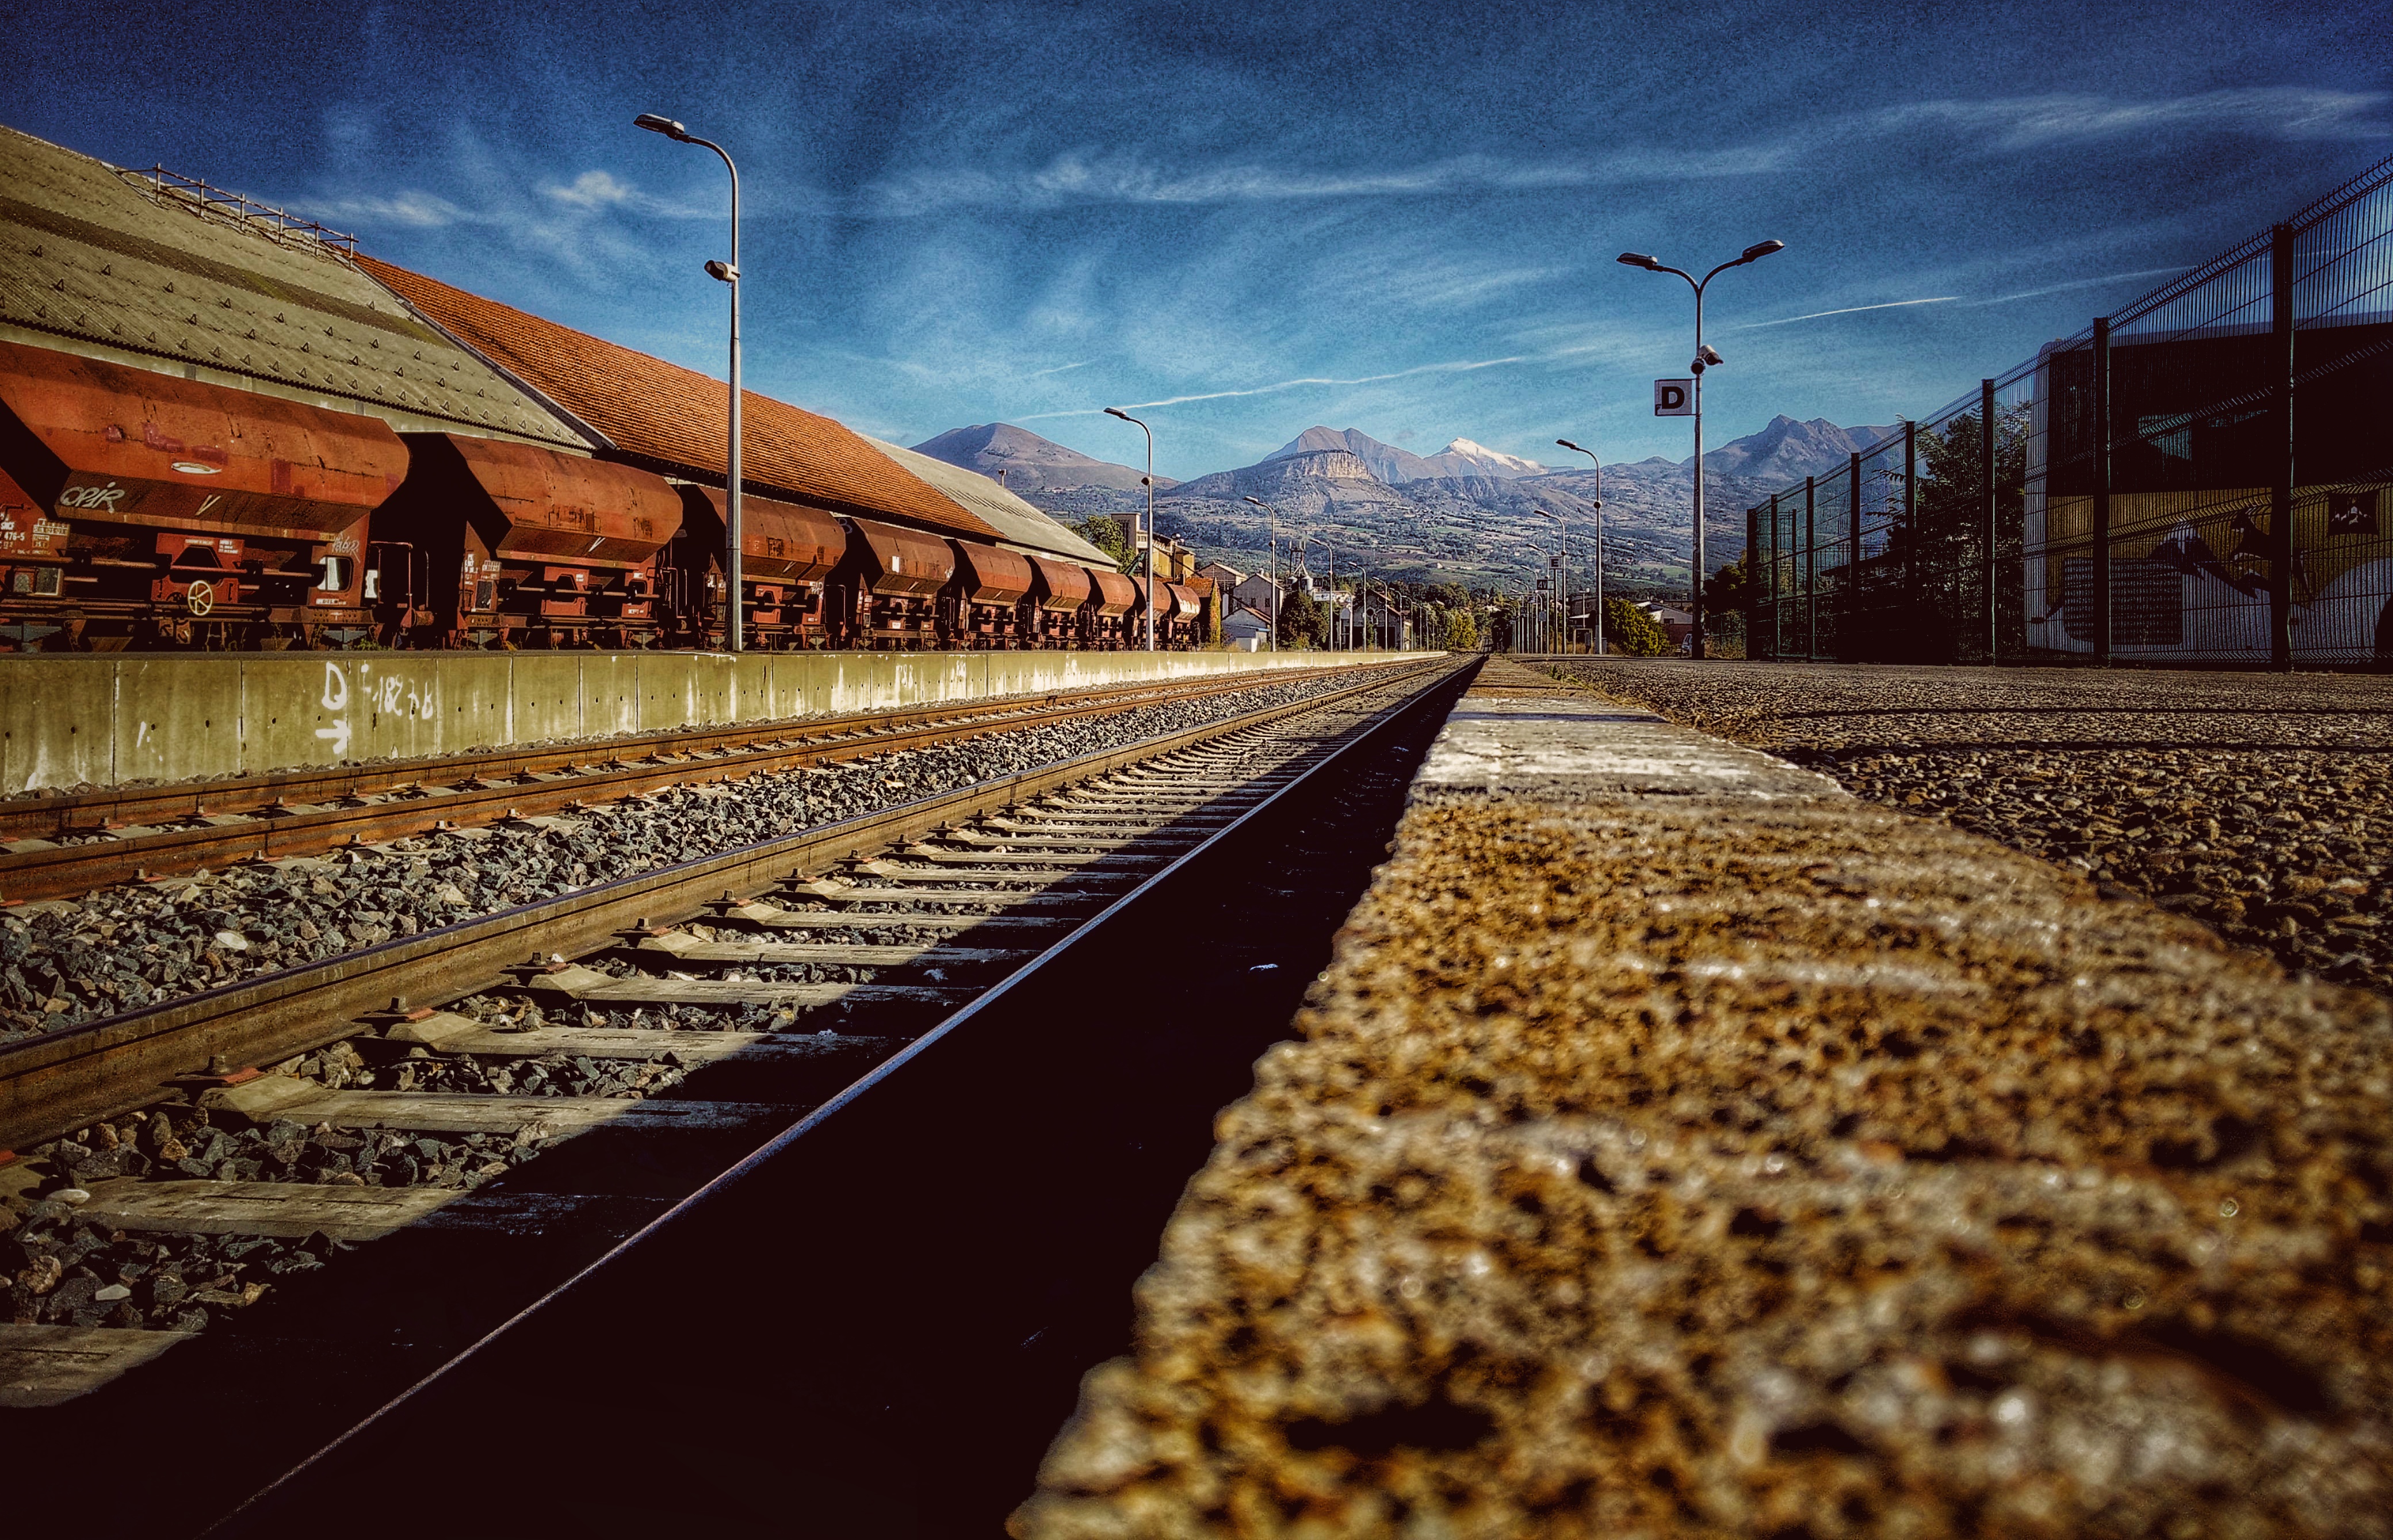 General 4160x2678 railway train station mountains sky France Alps Oneplus One